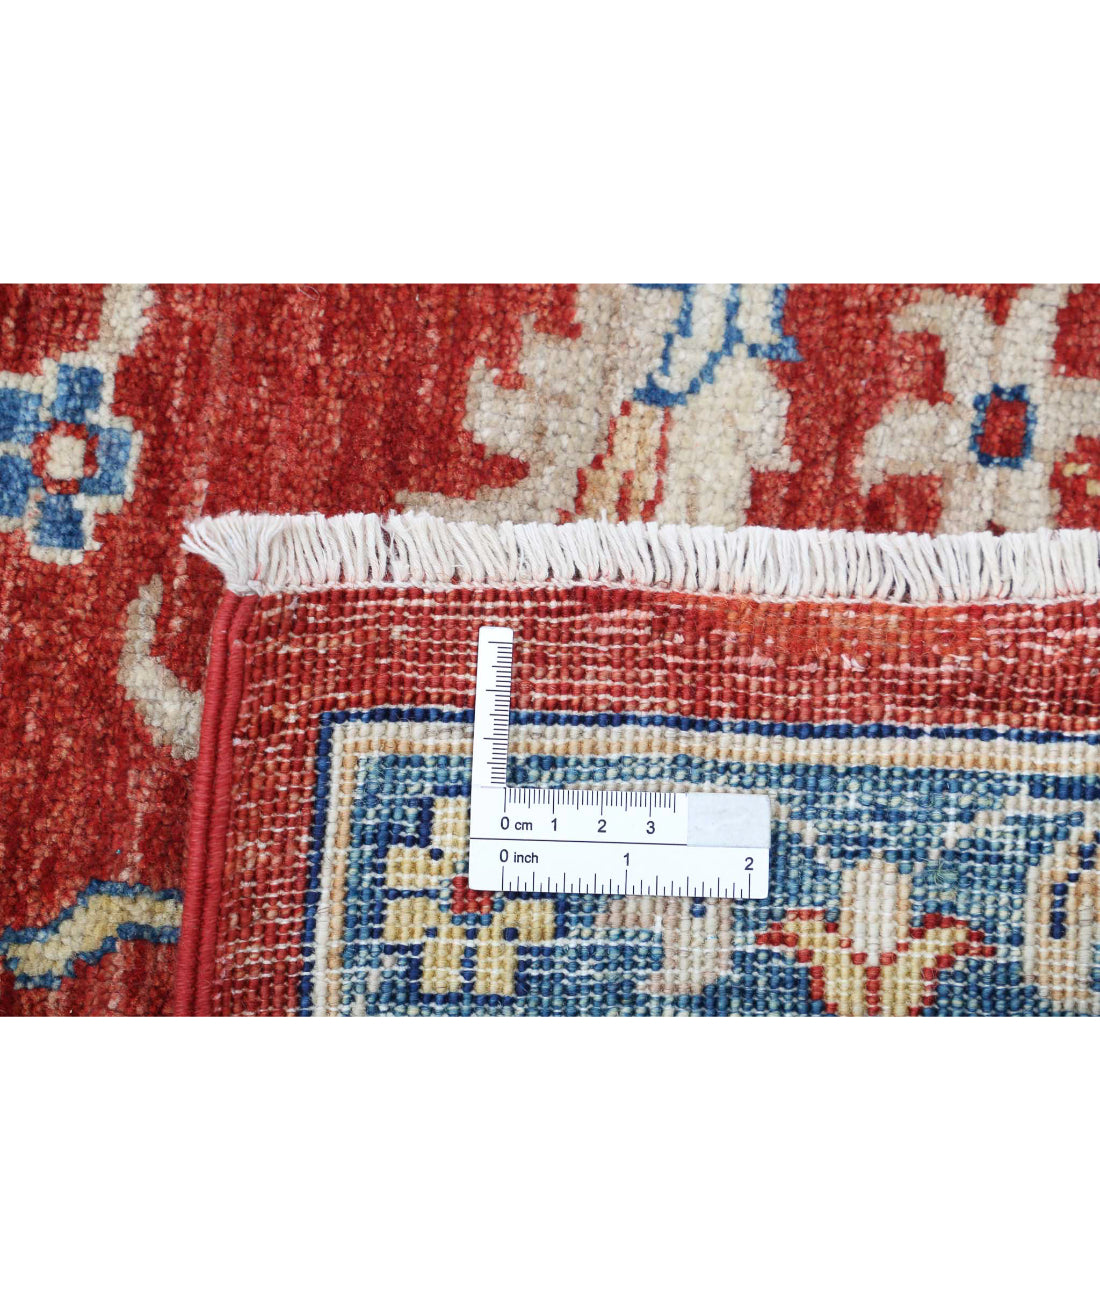 Ziegler 8'4'' X 10'0'' Hand-Knotted Wool Rug 8'4'' x 10'0'' (250 X 300) / Red / Blue